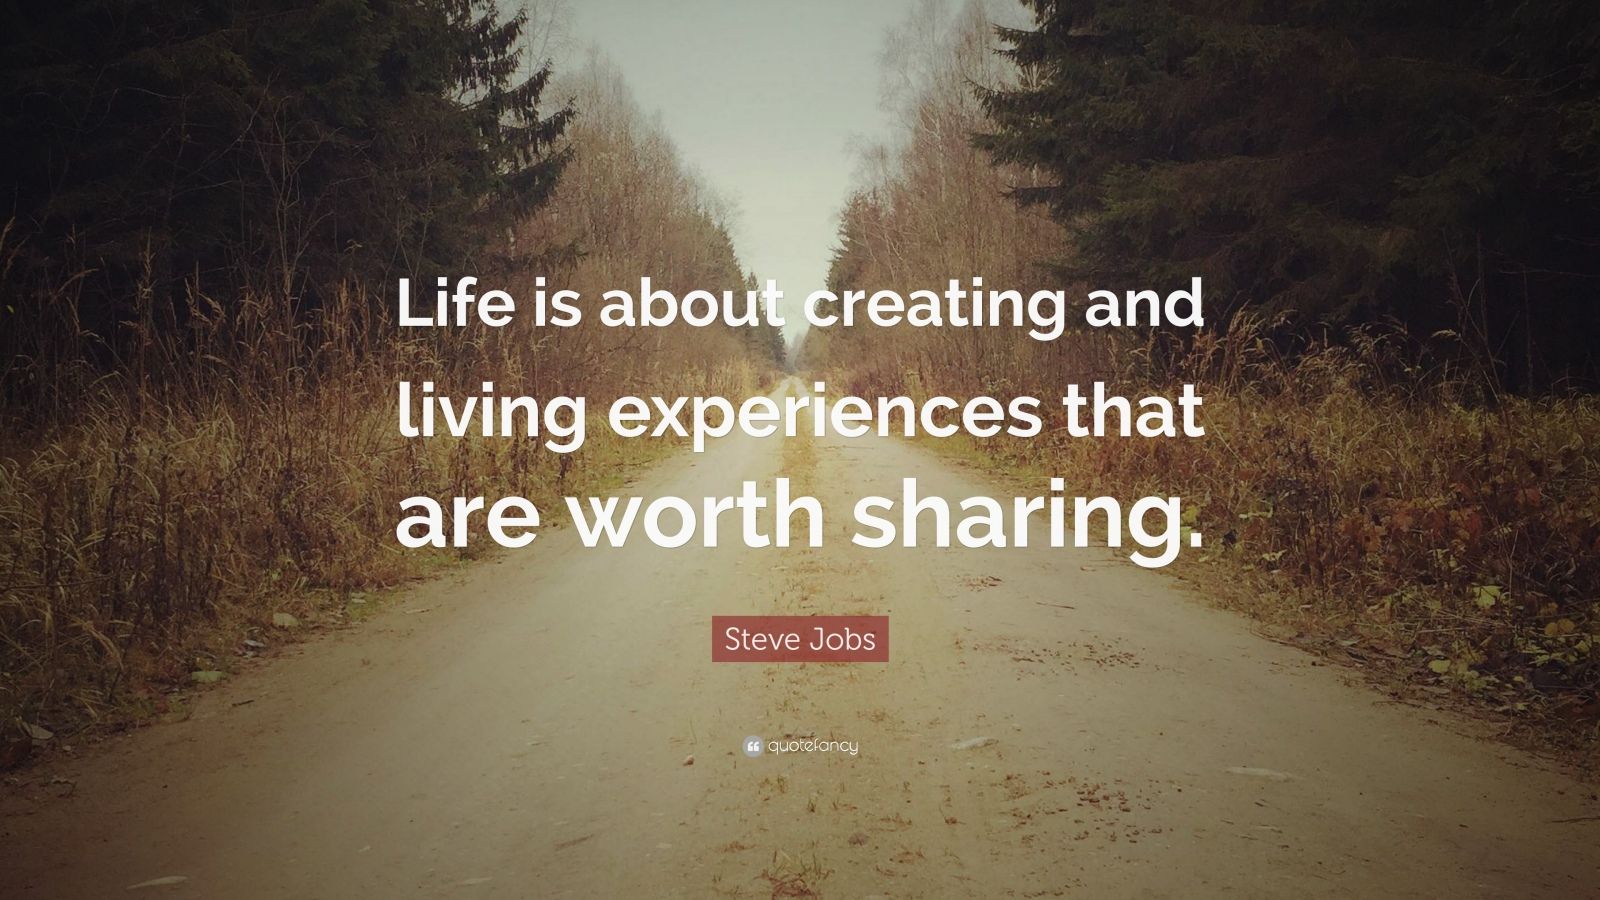 Steve Jobs Quote: “Life is about creating and living experiences that